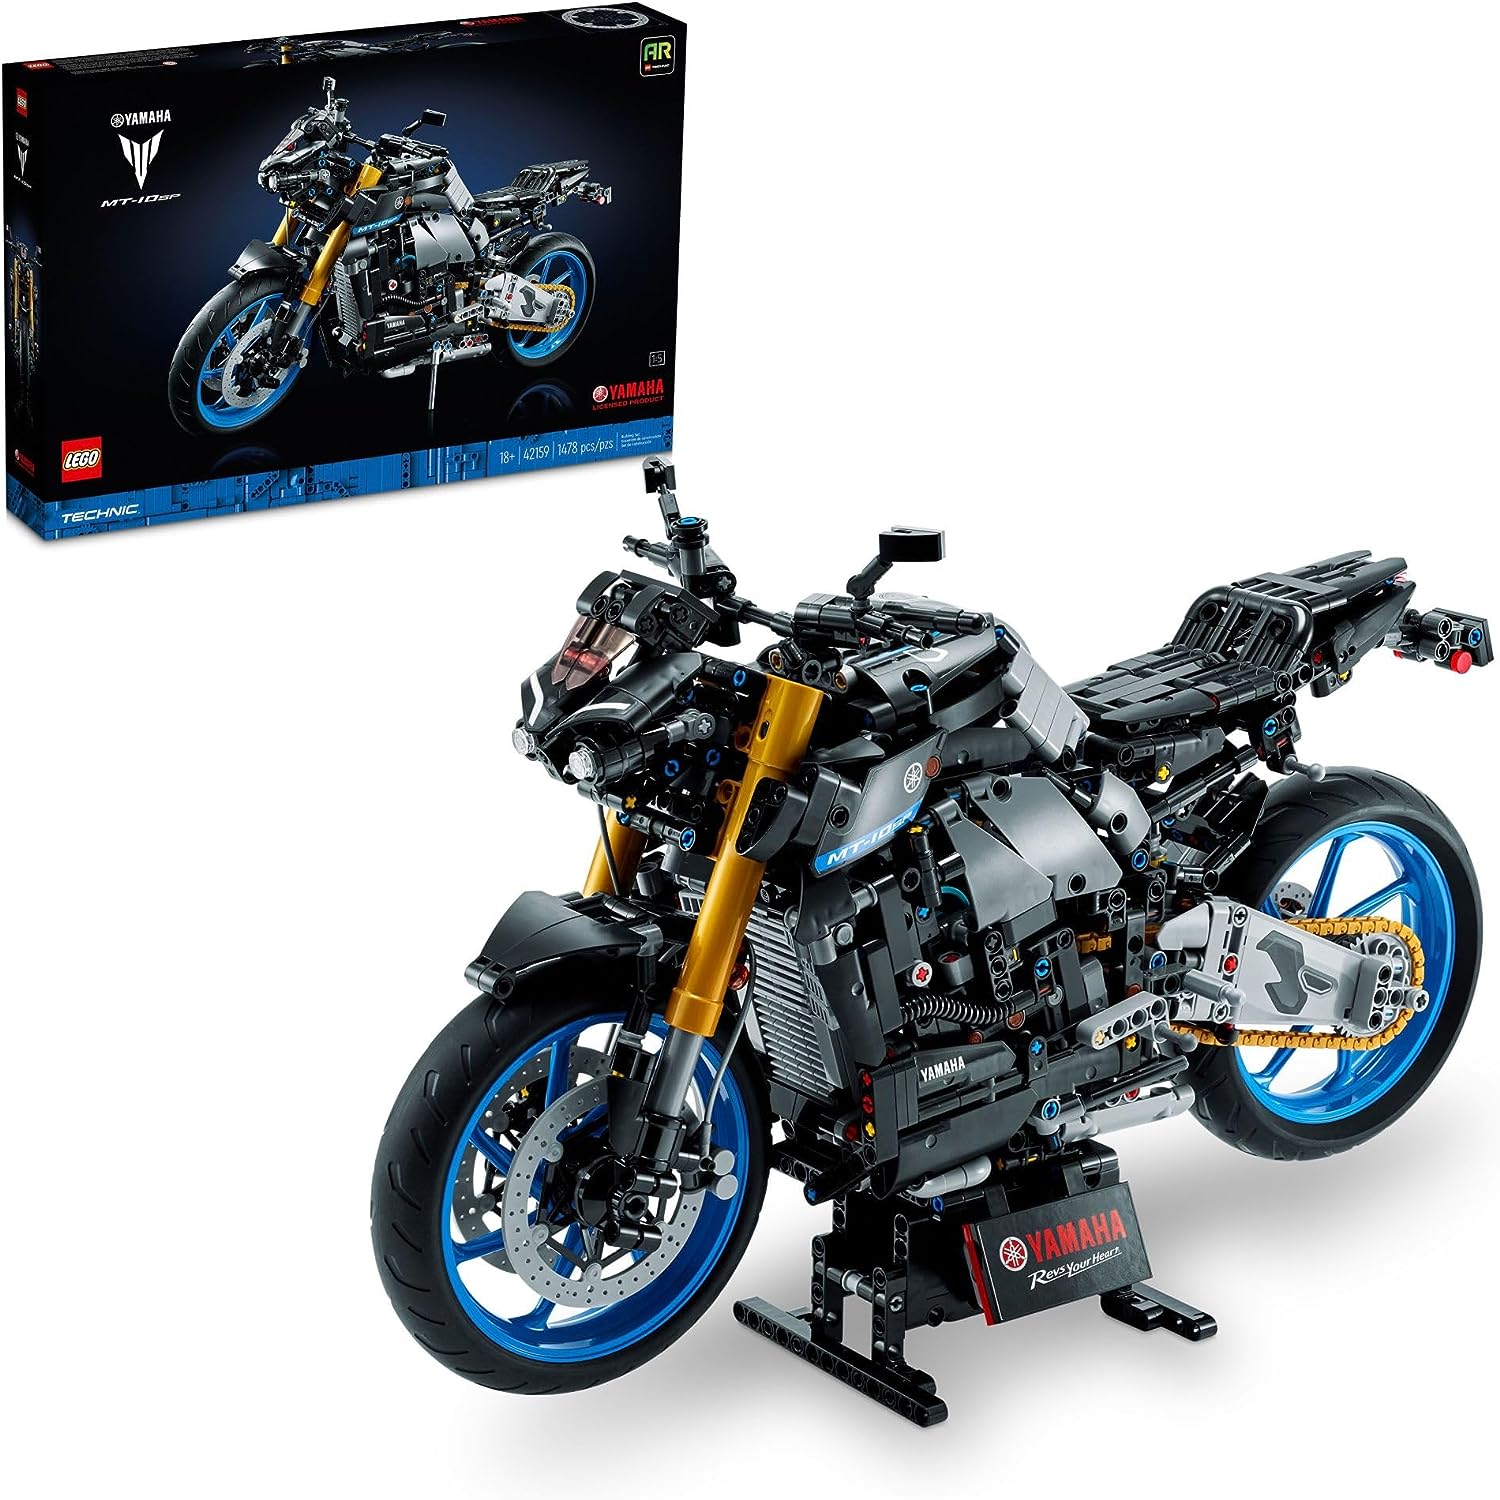 LEGO Technic Yamaha MT-10 SP 42159 Advanced Building Set for Adults, This Iconic Motorcycle Model for Build and Display Makes a Great Gift for Fans of Yamaha Vehicles or Motorcycle Collectibles